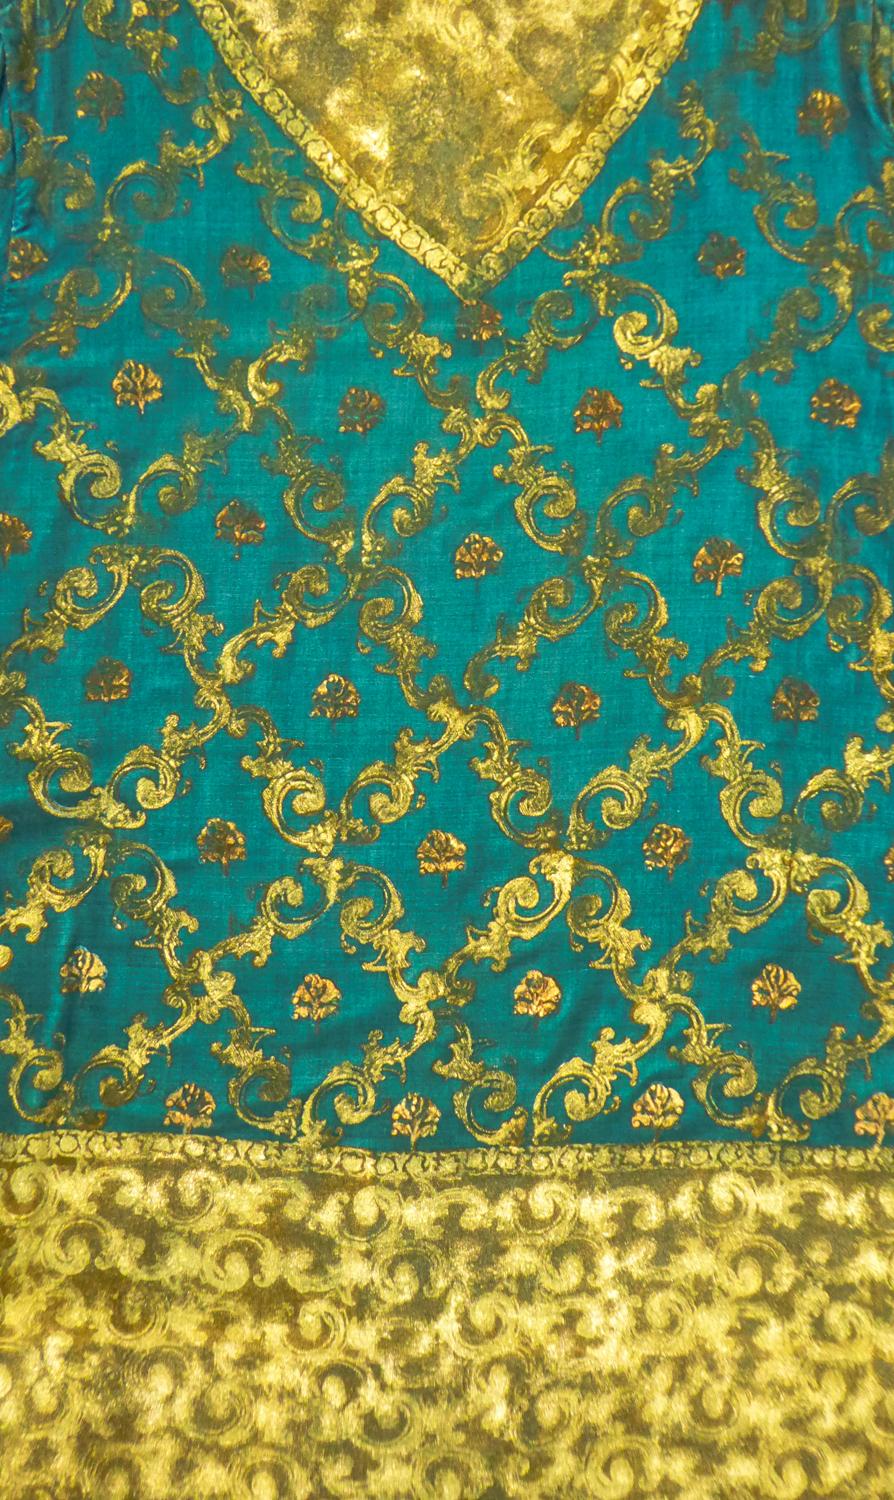 Circa 1928/1930
Italy

Evening jacket with kaftan-cut in peacock blue silk velvet painted and printed with golden motifs inspired by the medieval period from the famous Italian seamstress, Maria Monacci Gallenga, around 1928/1930. Wide and fluid cut